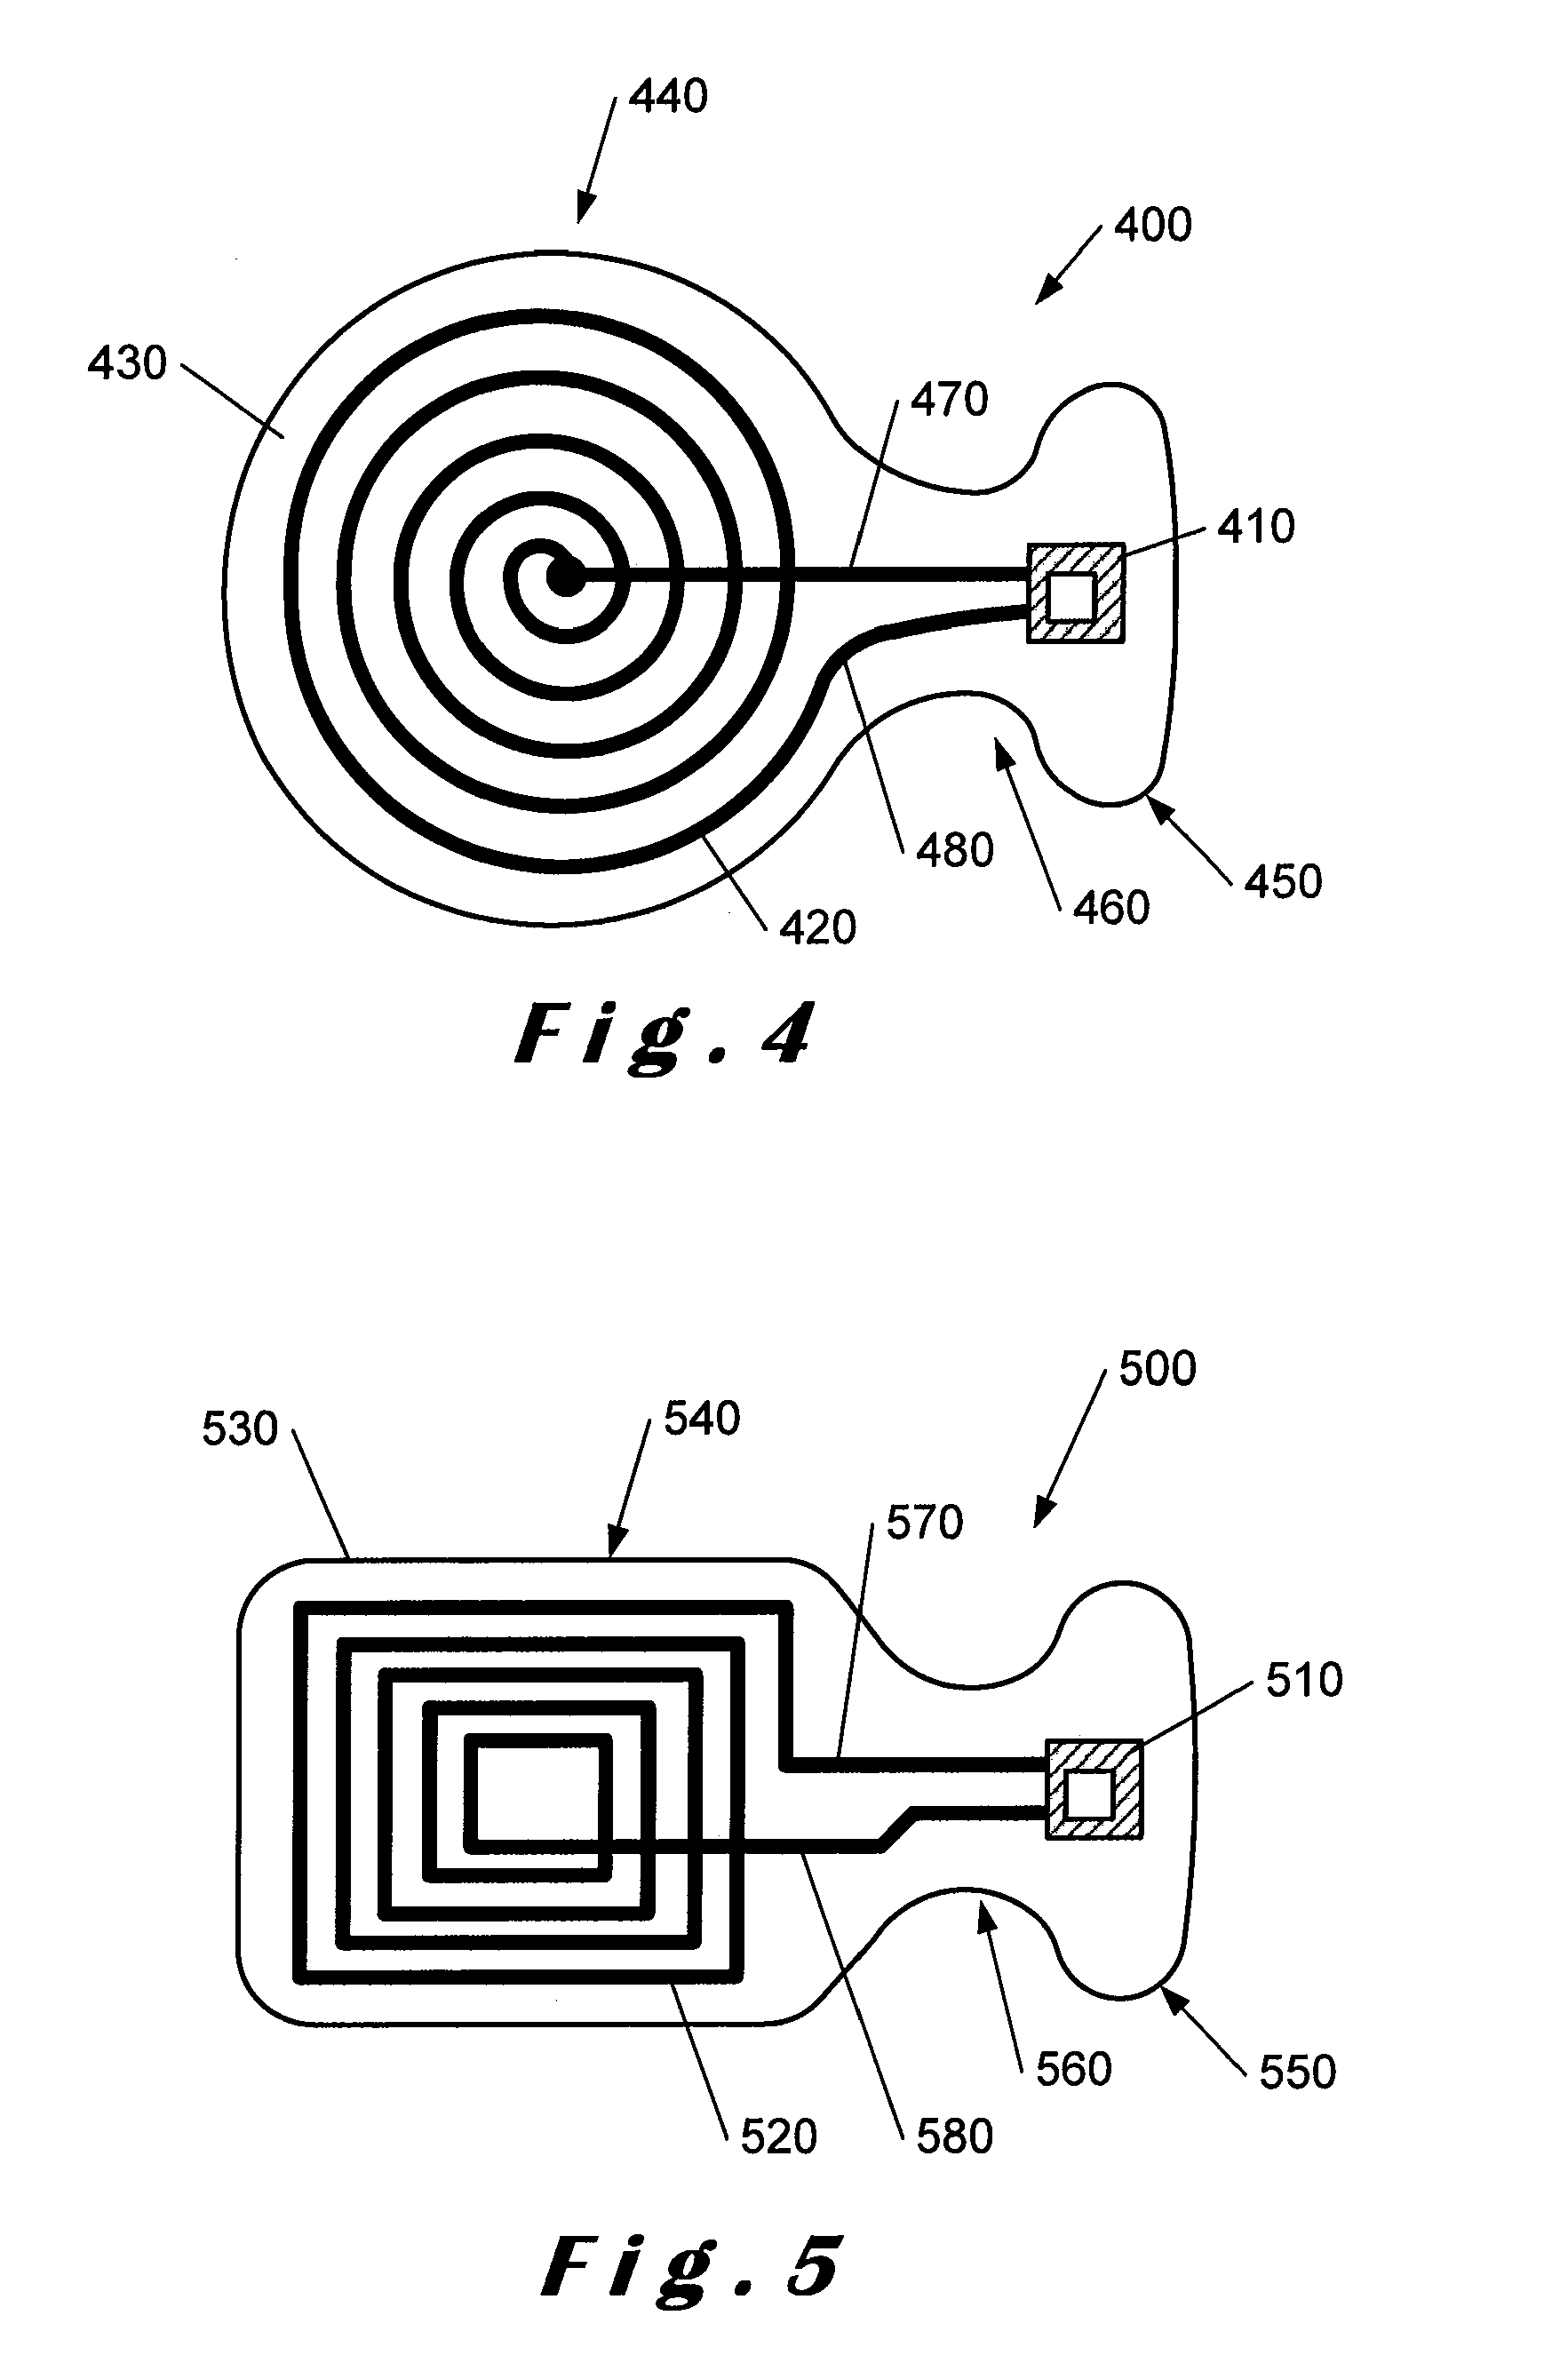 Device and method for glaucoma management and treatment